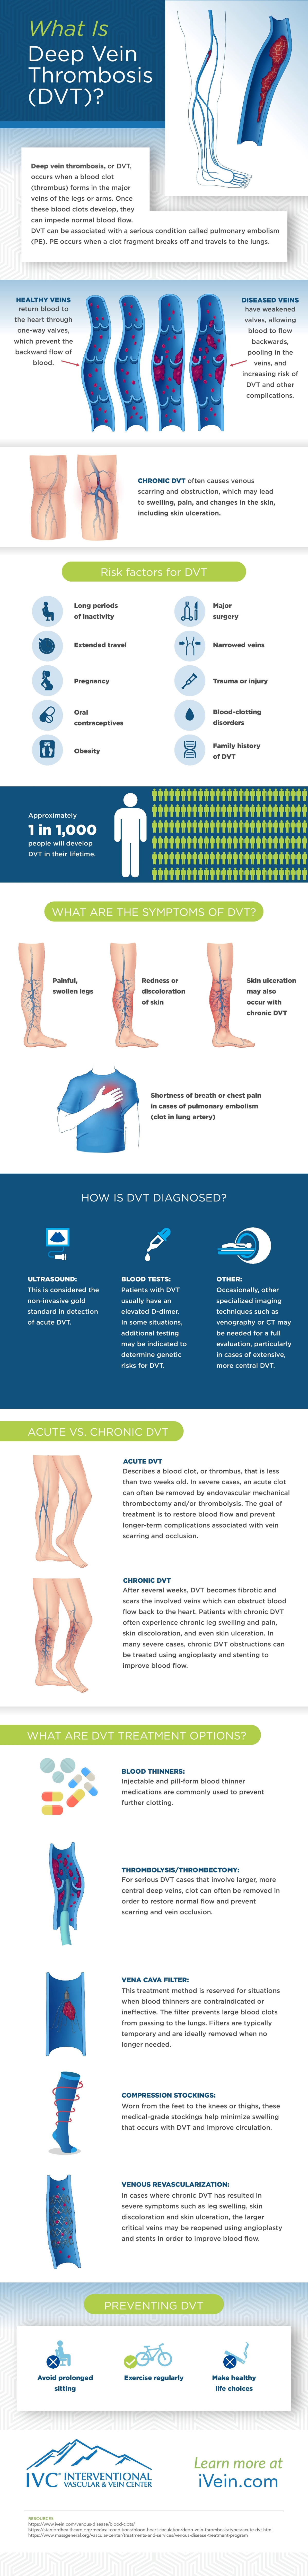 What is deep vein thrombosis infographic